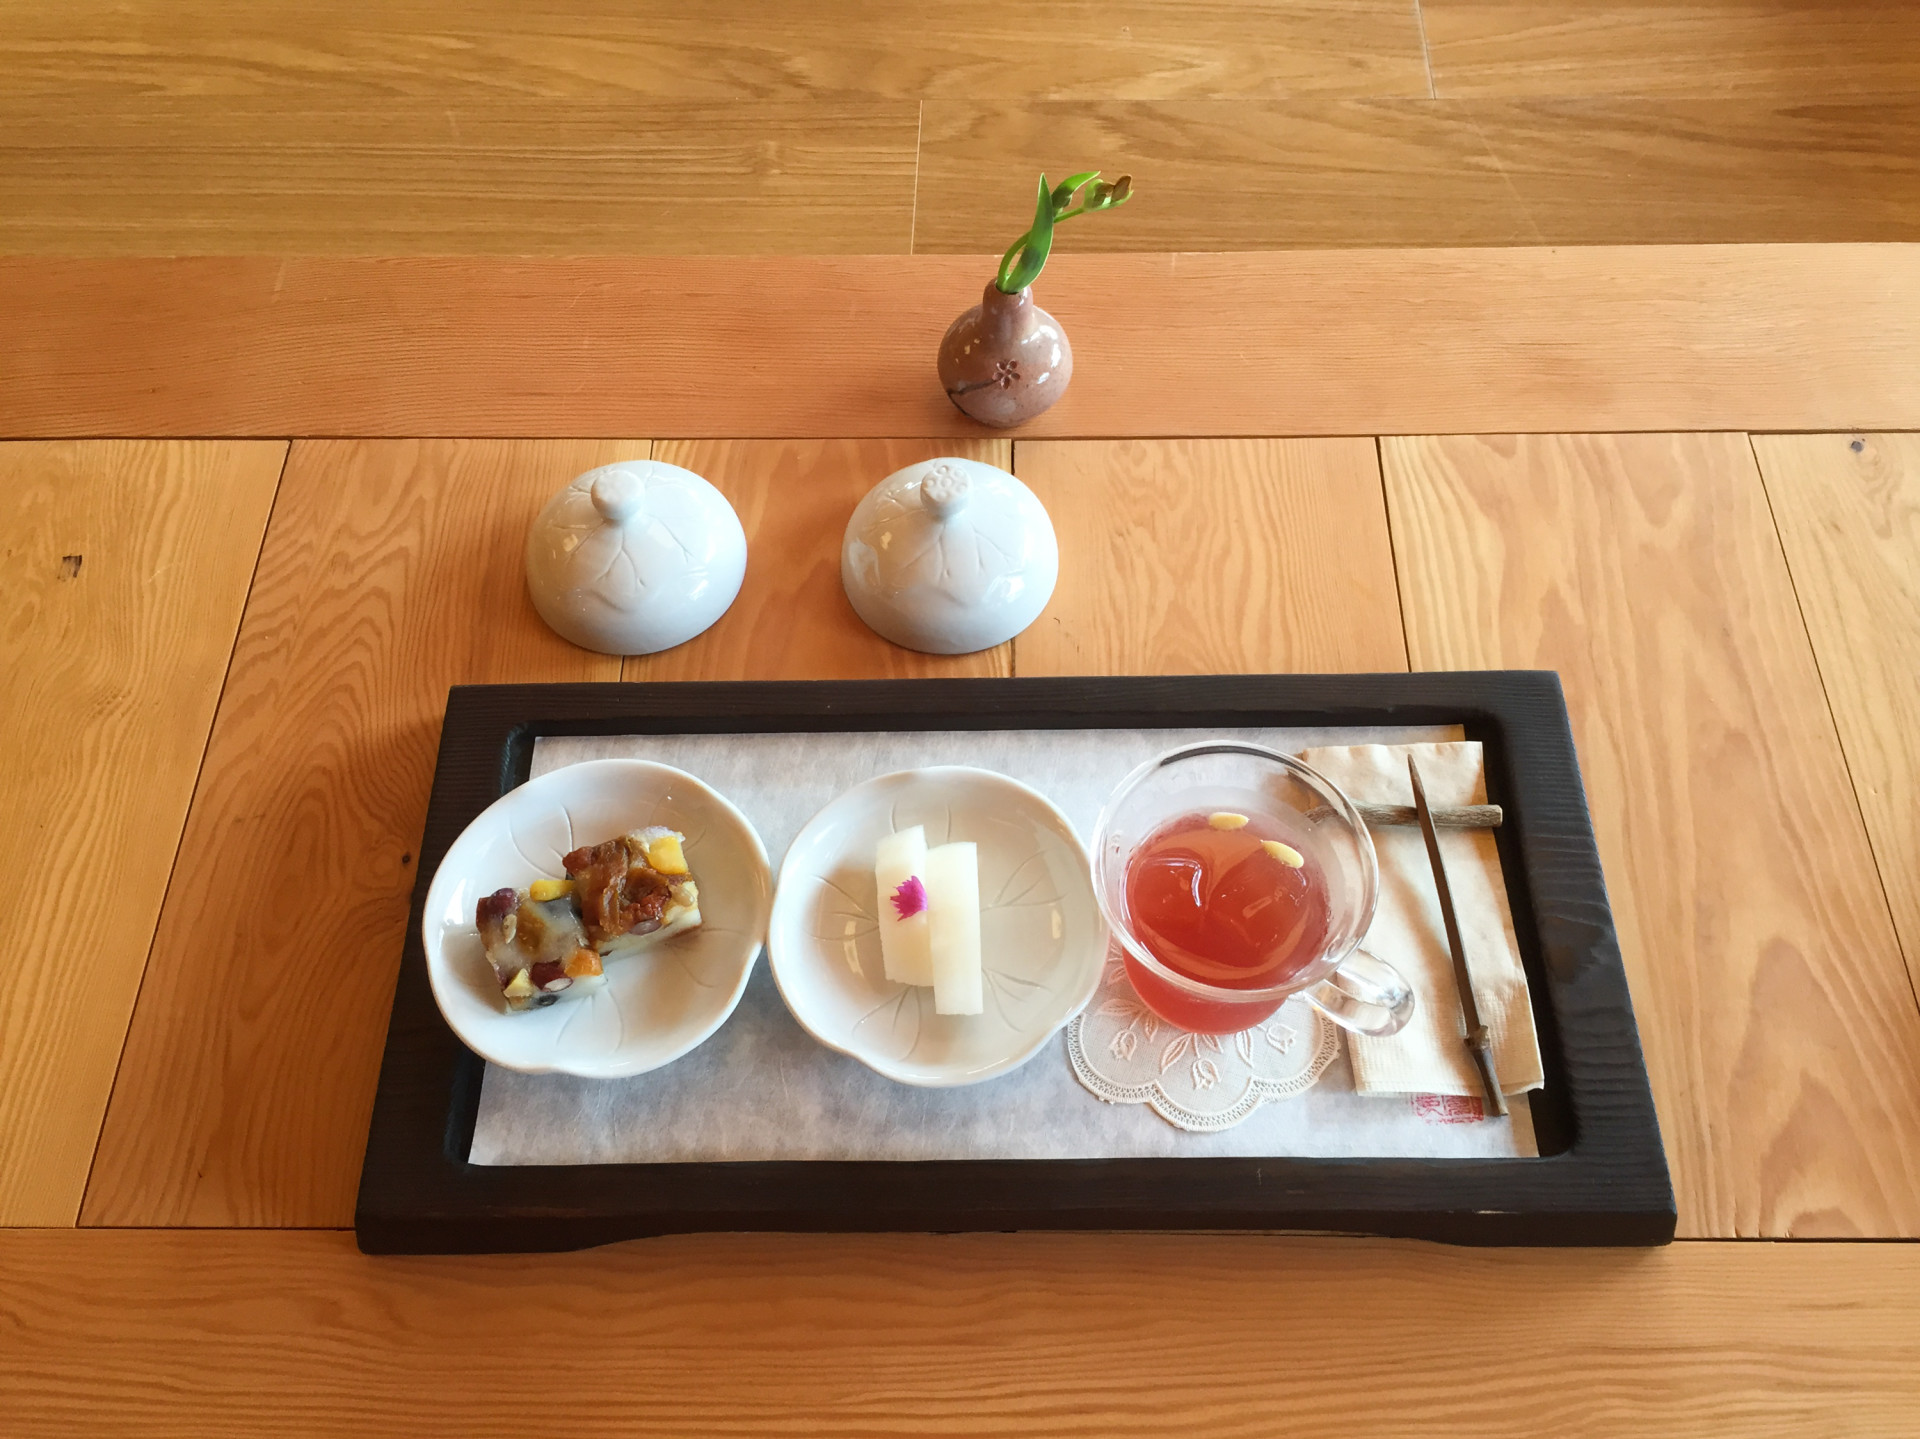 Iced tea made from local berries is served with melon and squares of sweet sticky rice topped with fruits and nuts. The nuns eat these sweets on head-shaving day, to replenish their energy.